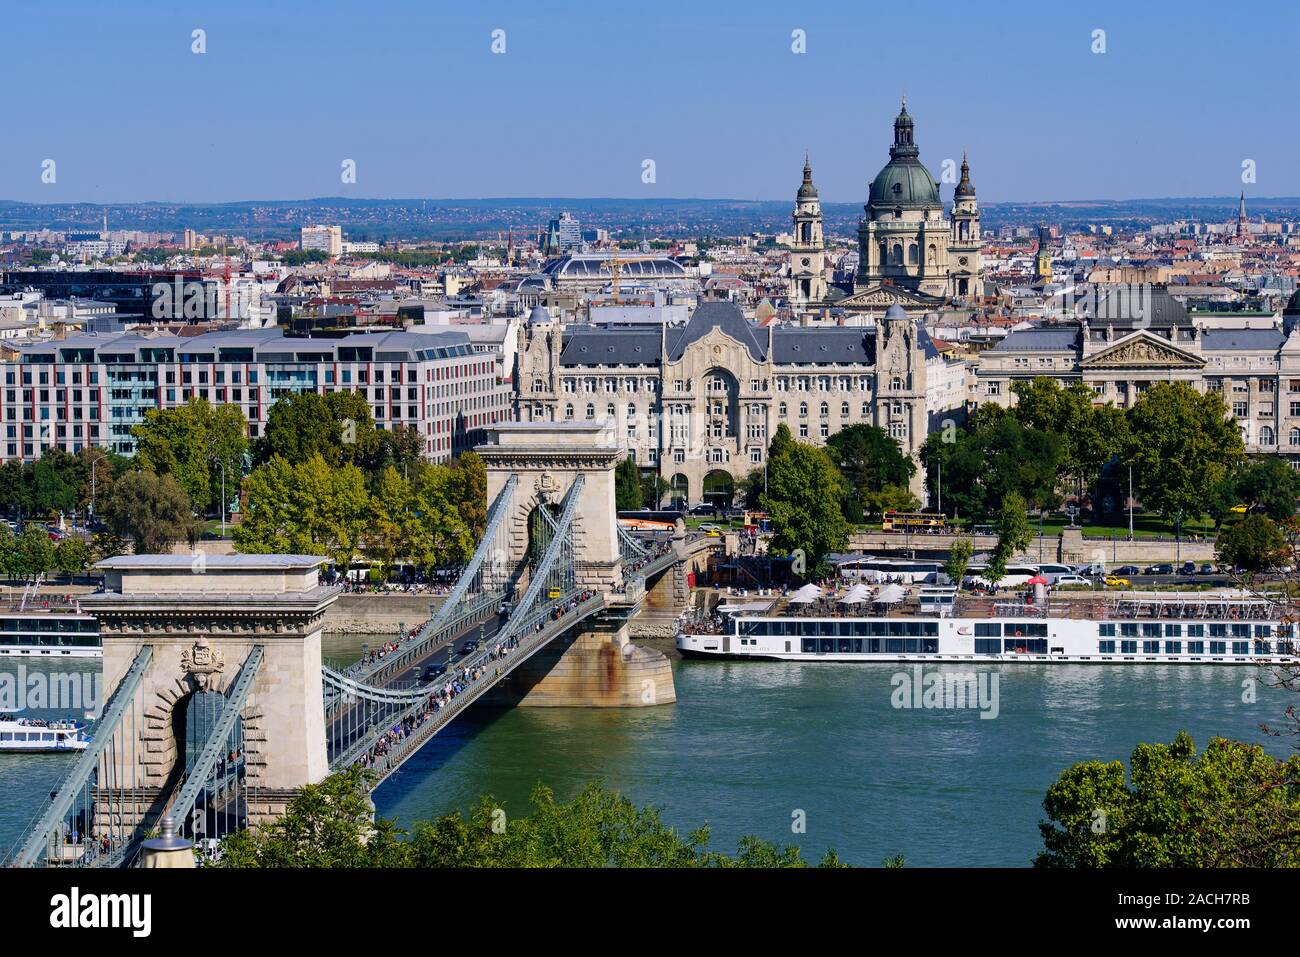 Aerial view of Széchenyi Chain Bridge across the River Danube connecting Buda and Pest, Budapest, Hungary Stock Photo